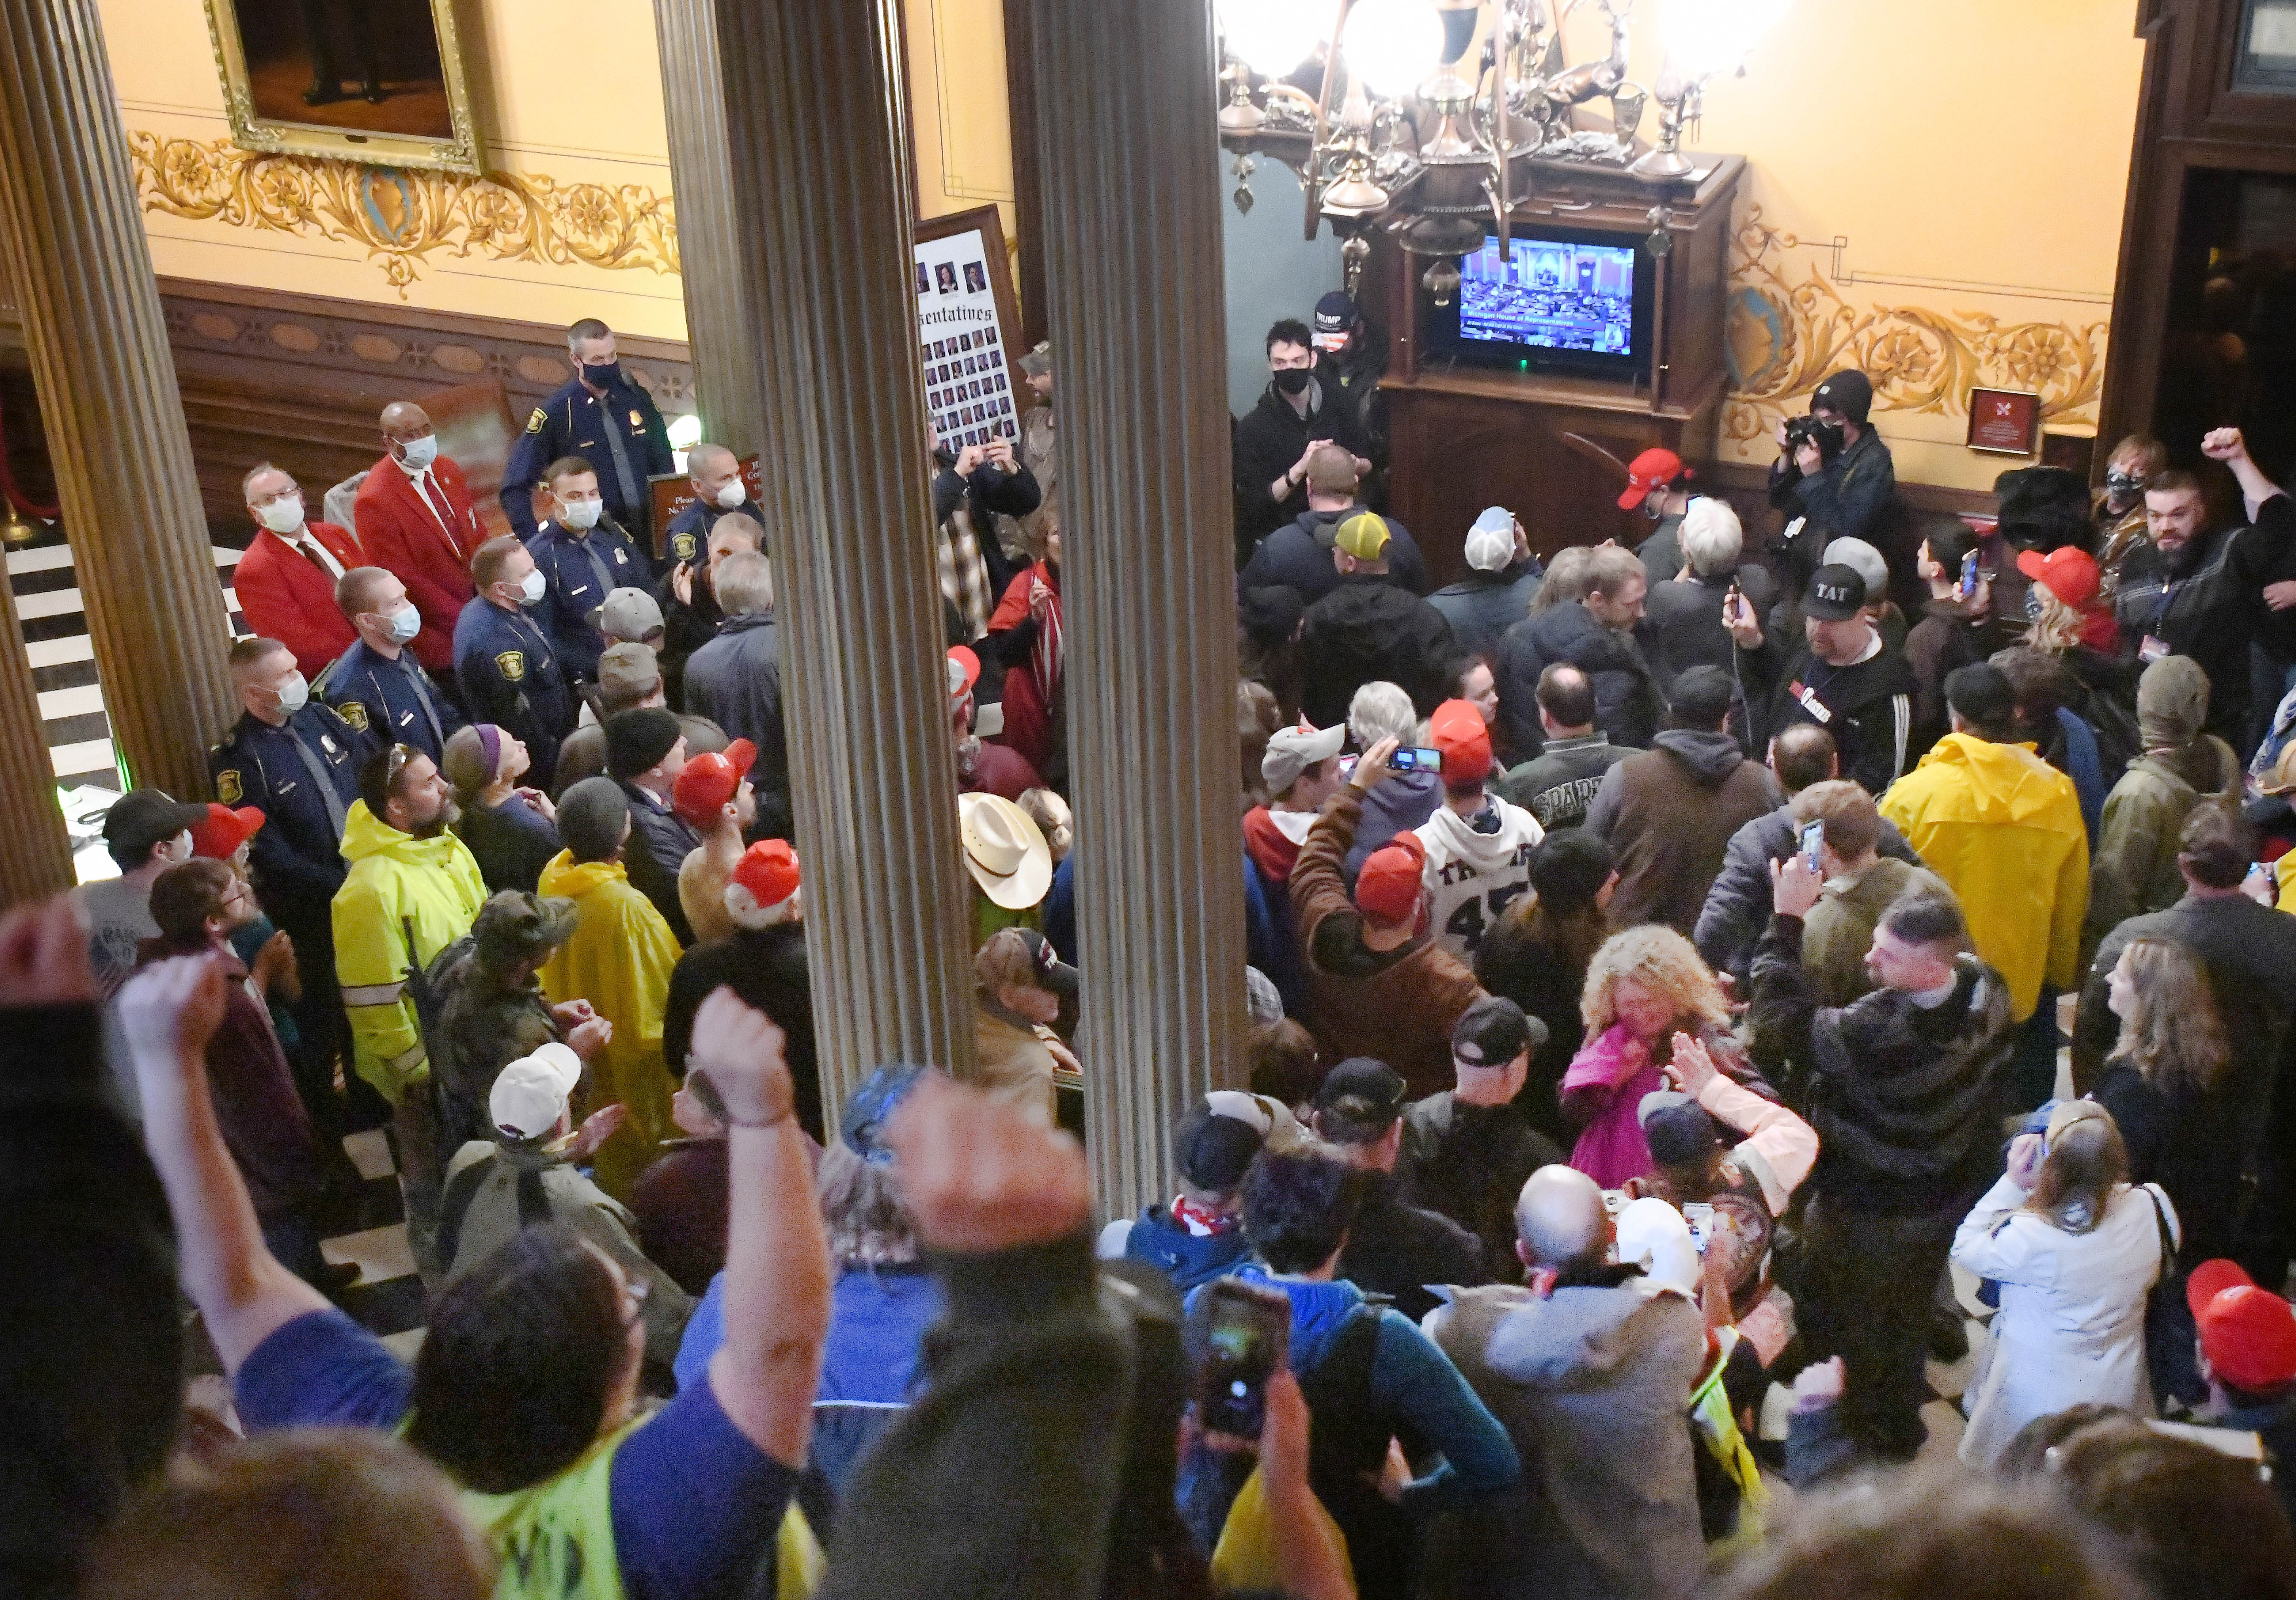 Protesters cheer as they watch the proceedings on a monitor outside the House of Representatives inside the Capitol in Lansing, The Michigan House approved a resolution that authorizes Speaker Lee Chatfield, R-Levering, to file a legal challenge against unilateral efforts Gov. Gretchen Whitmer has taken to prevent the spread of COVID-19.